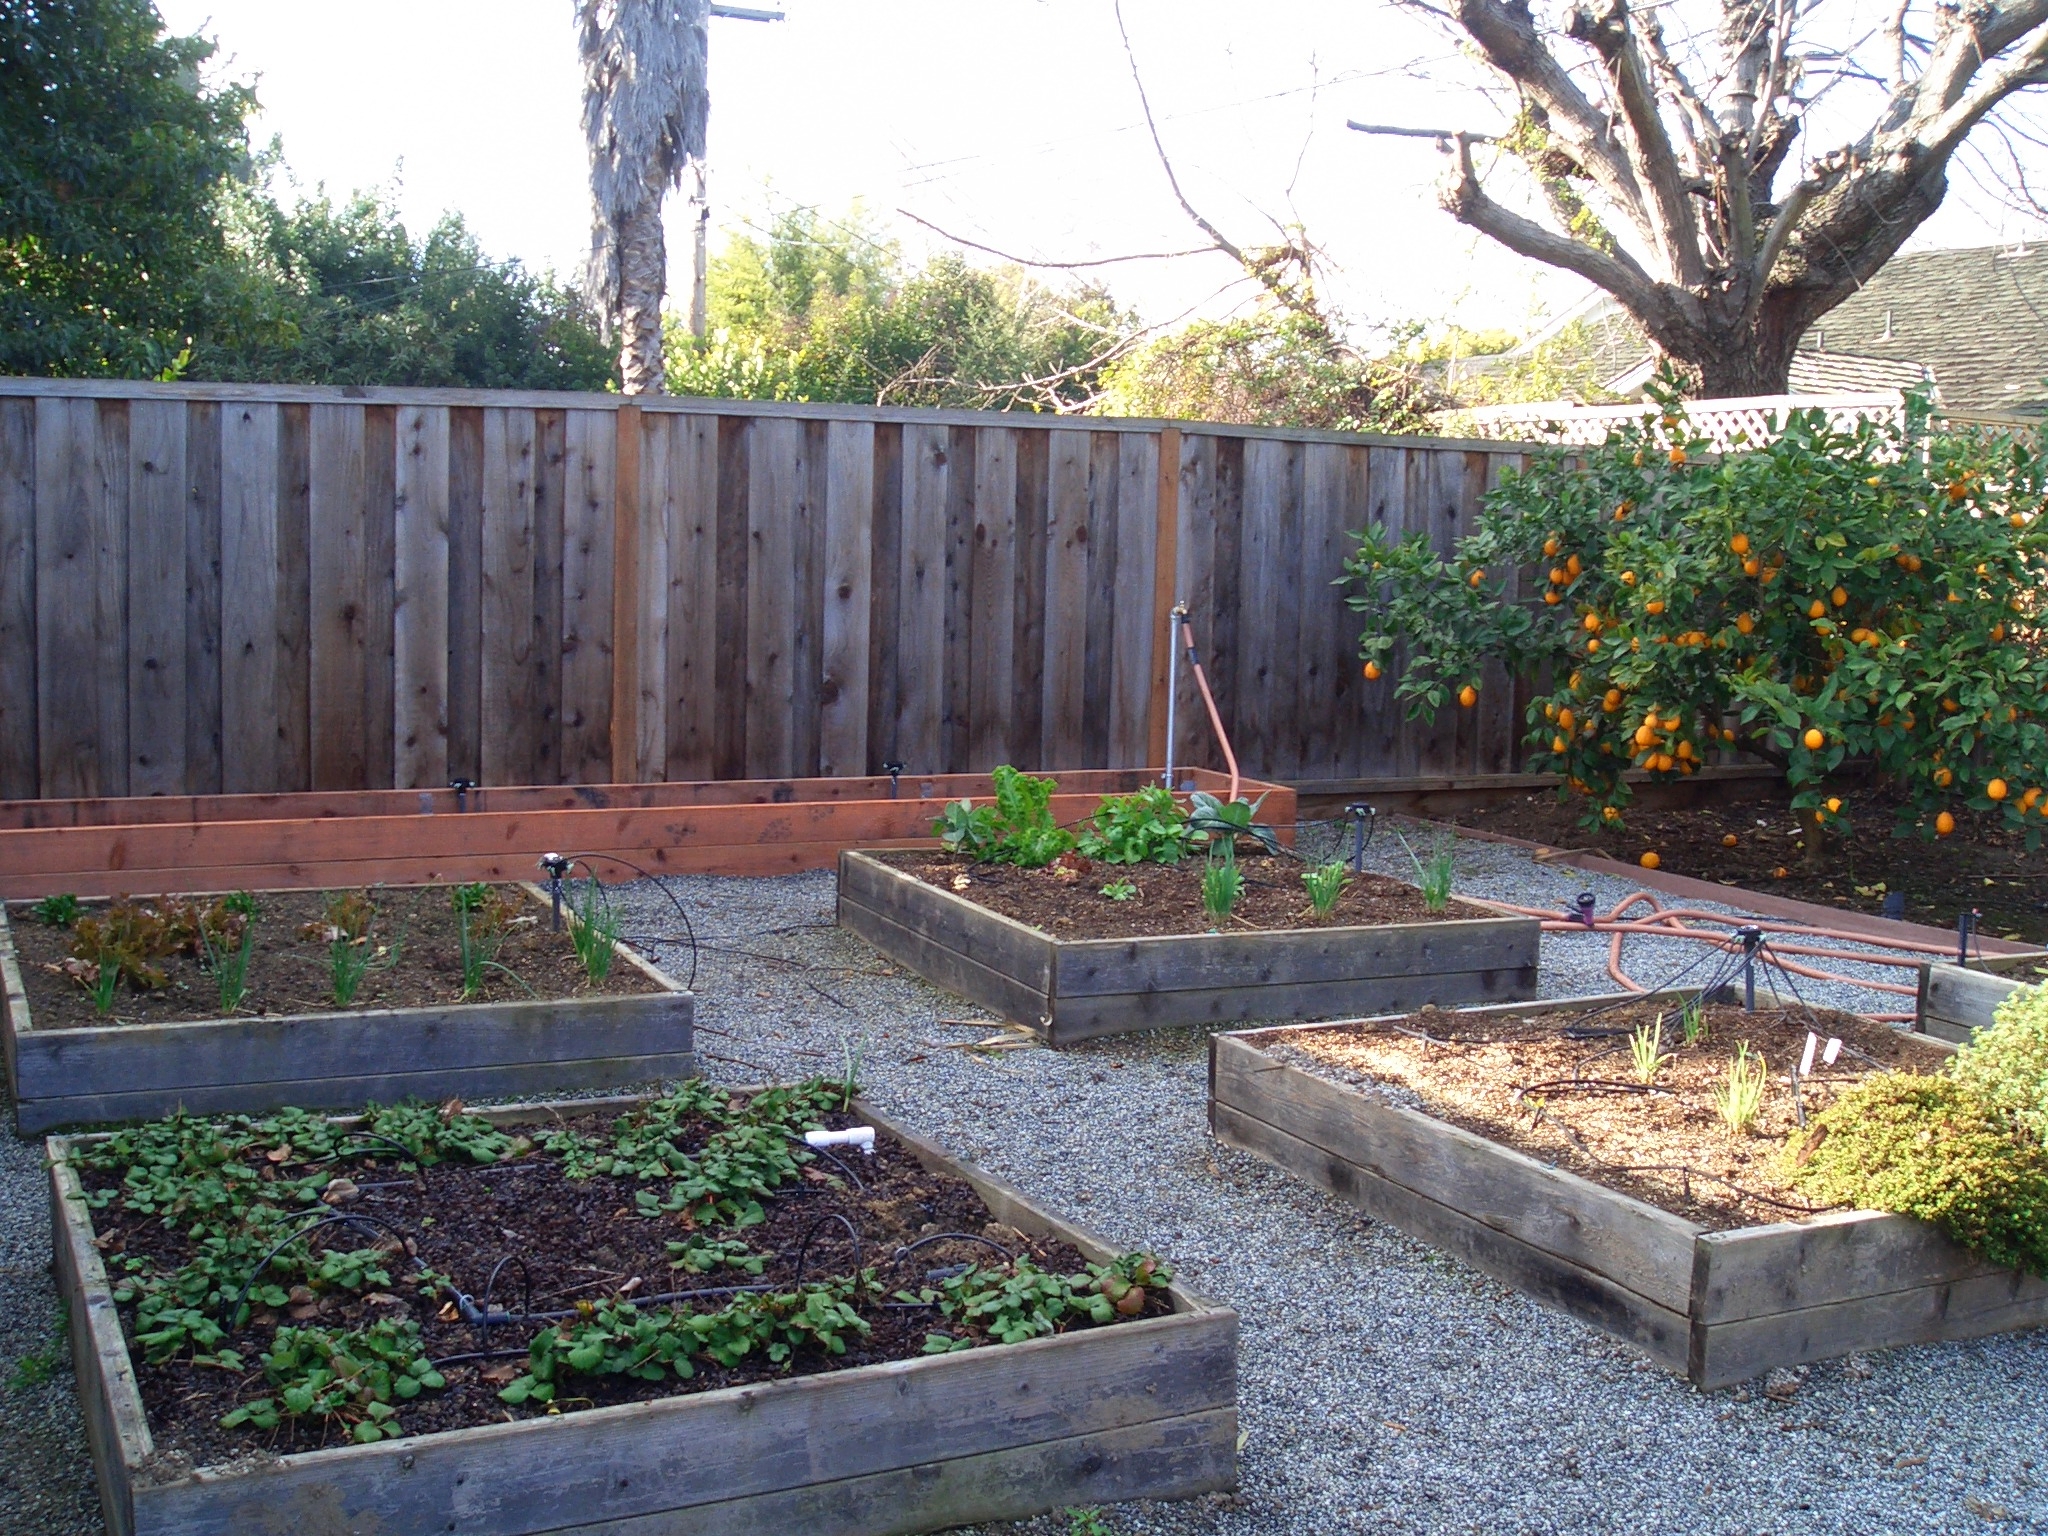 Ten tips for vegetable gardening during a drought   Green Blog ...